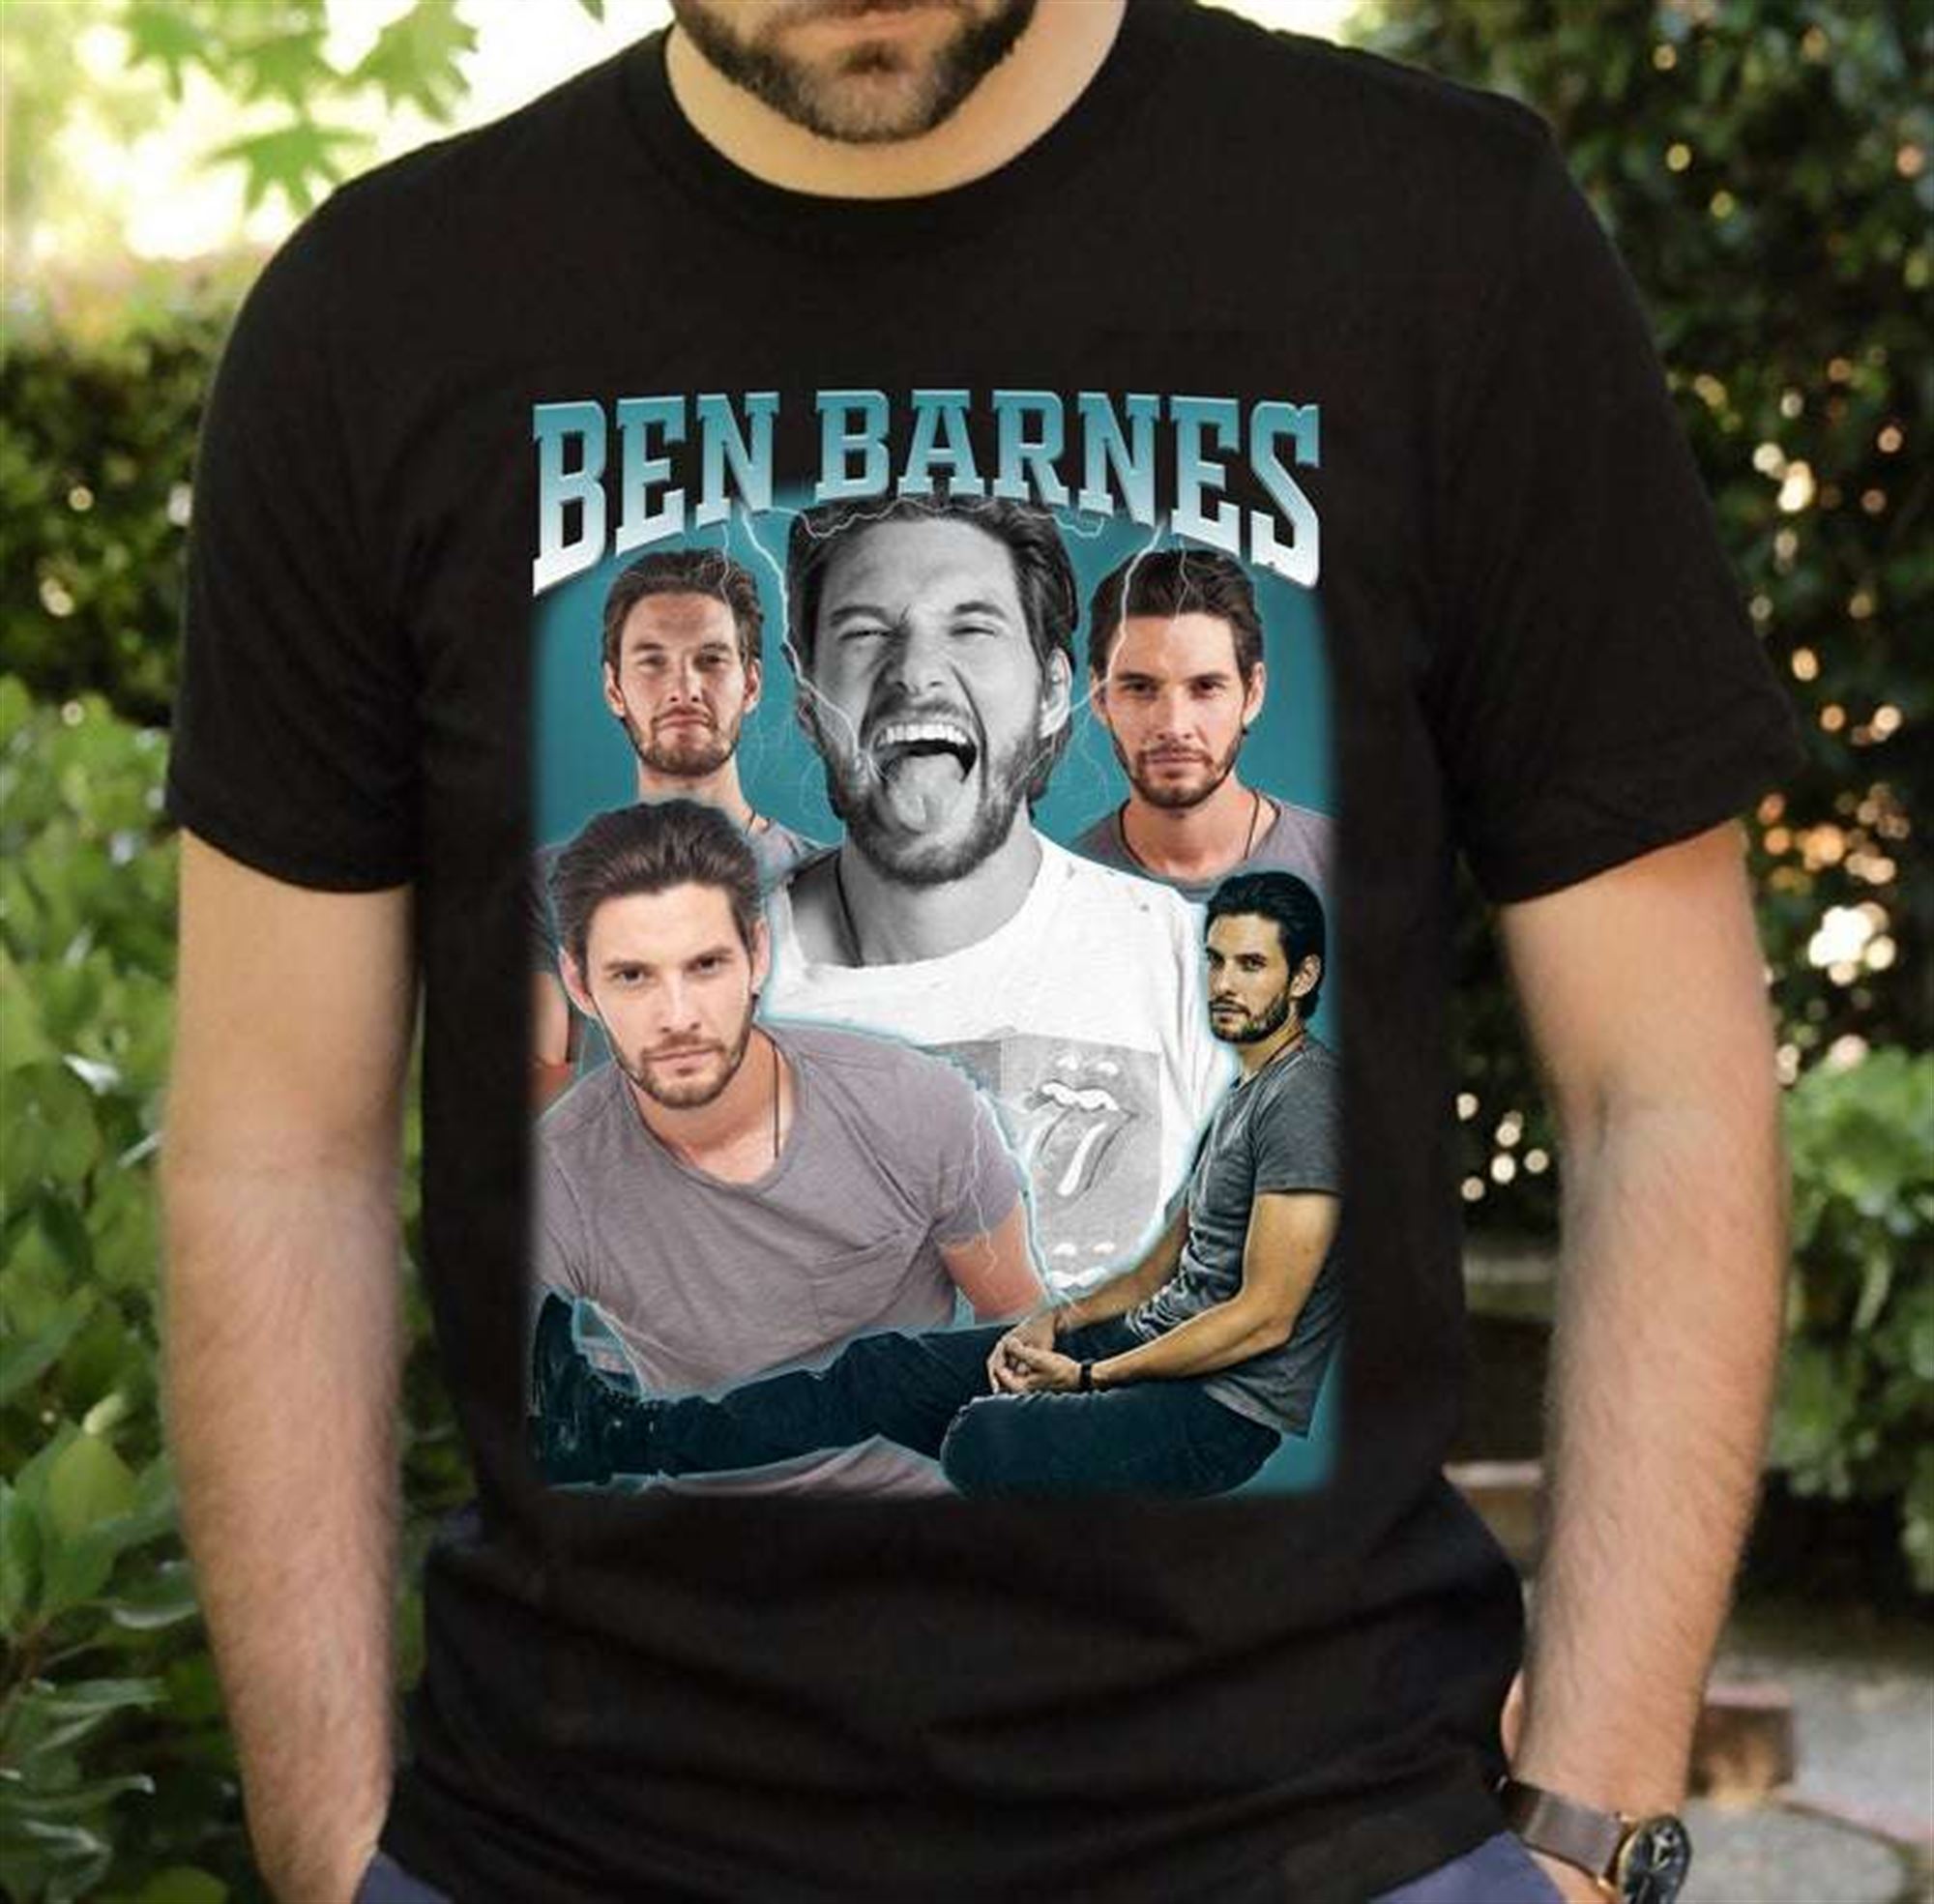 Ben Barnes Shadow And Bone Movie T Shirt Size Up To 5xl